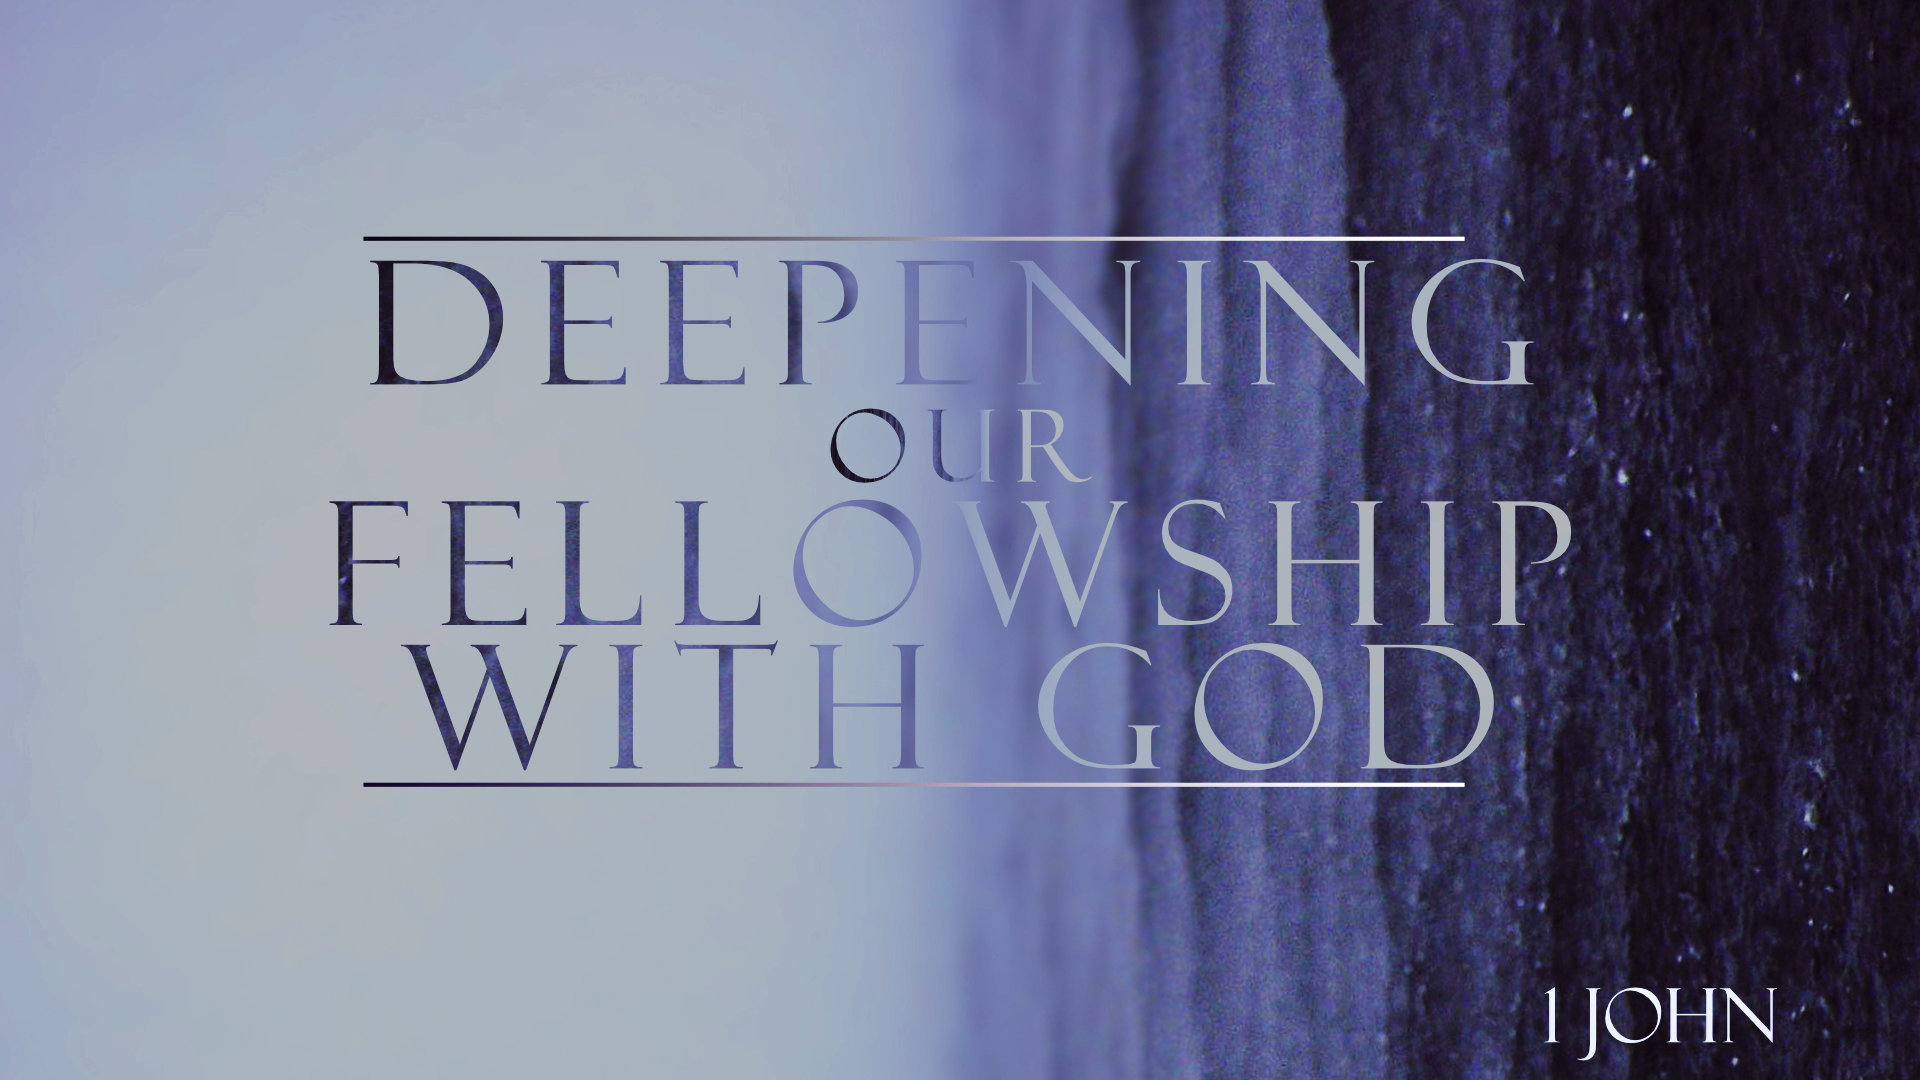 Deepening Our Fellowship With God • Jan. 22 - Feb. 26, 2016